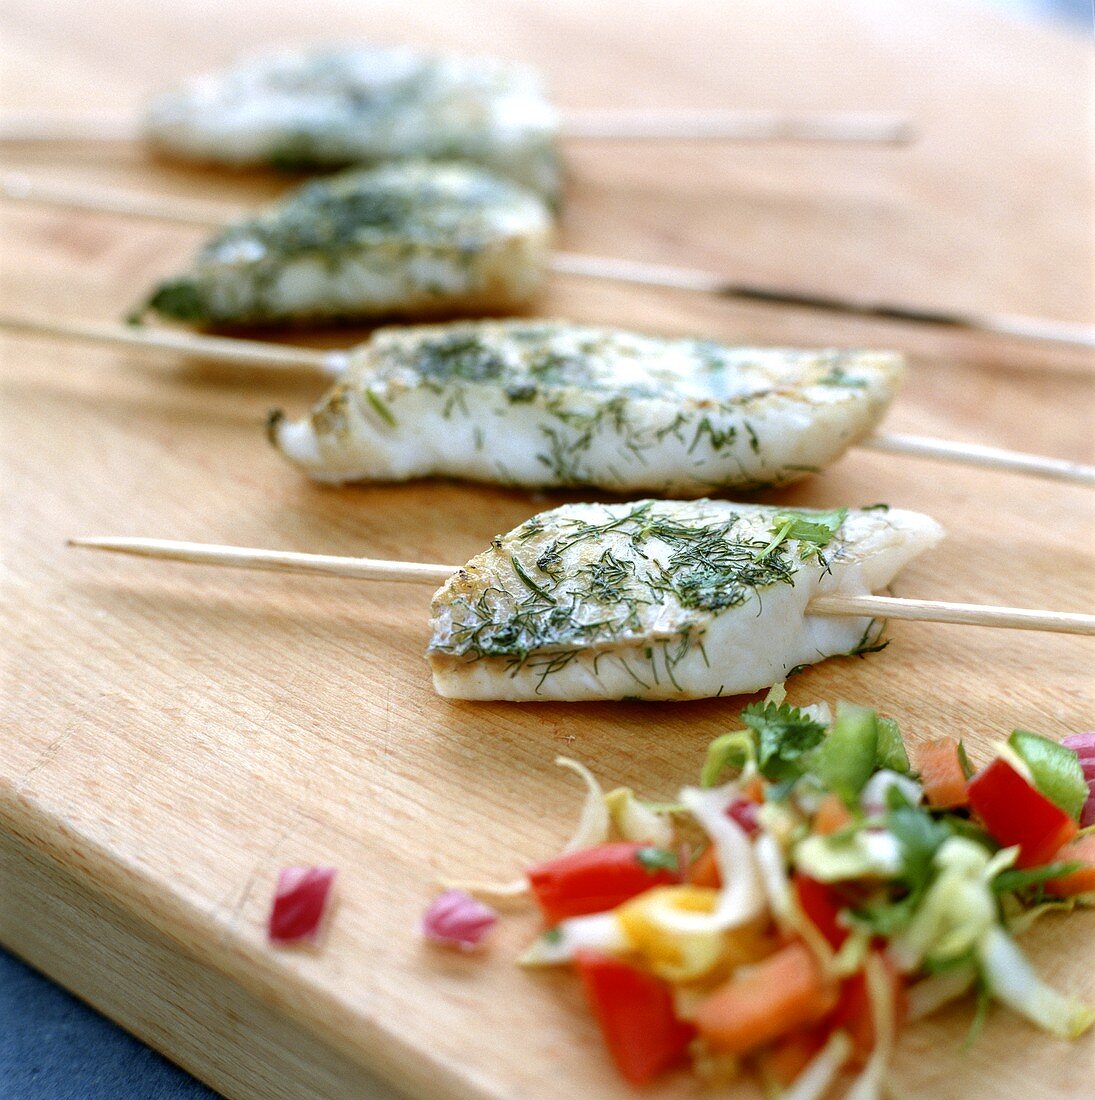 Barbecued pike-perch fillet on skewer